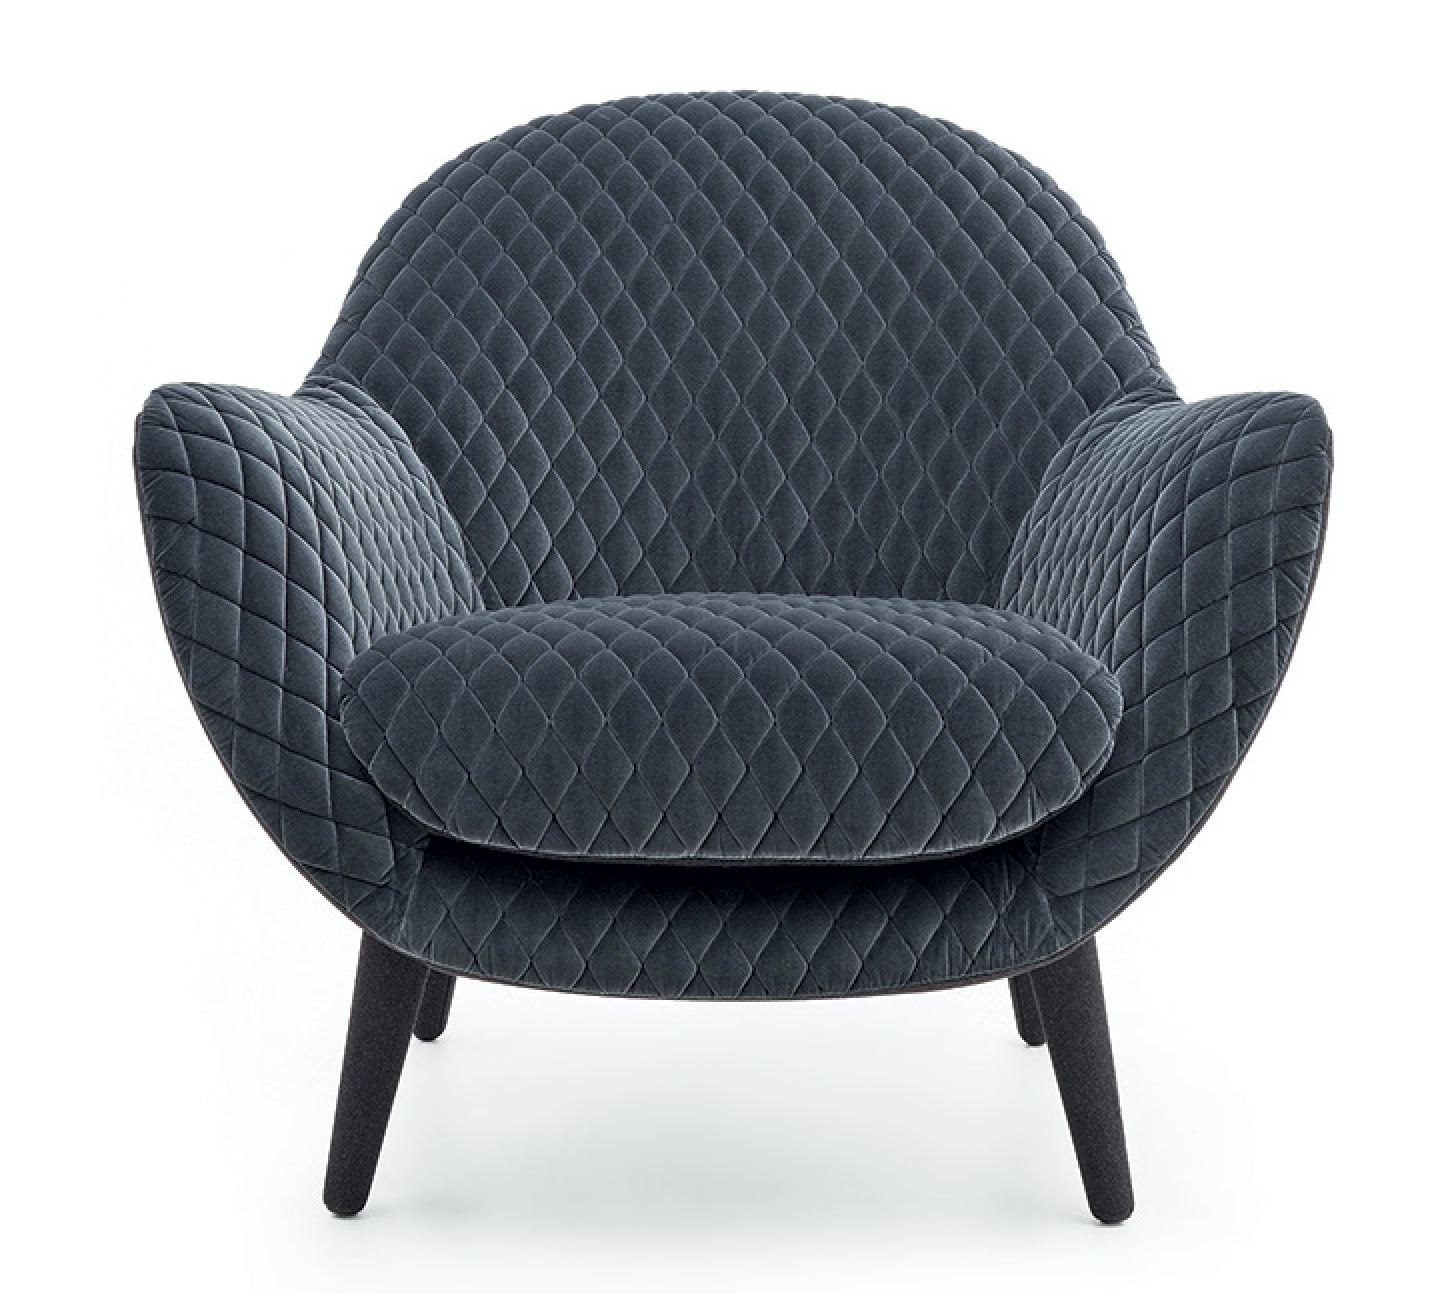 Product Image Mad Queen armchair